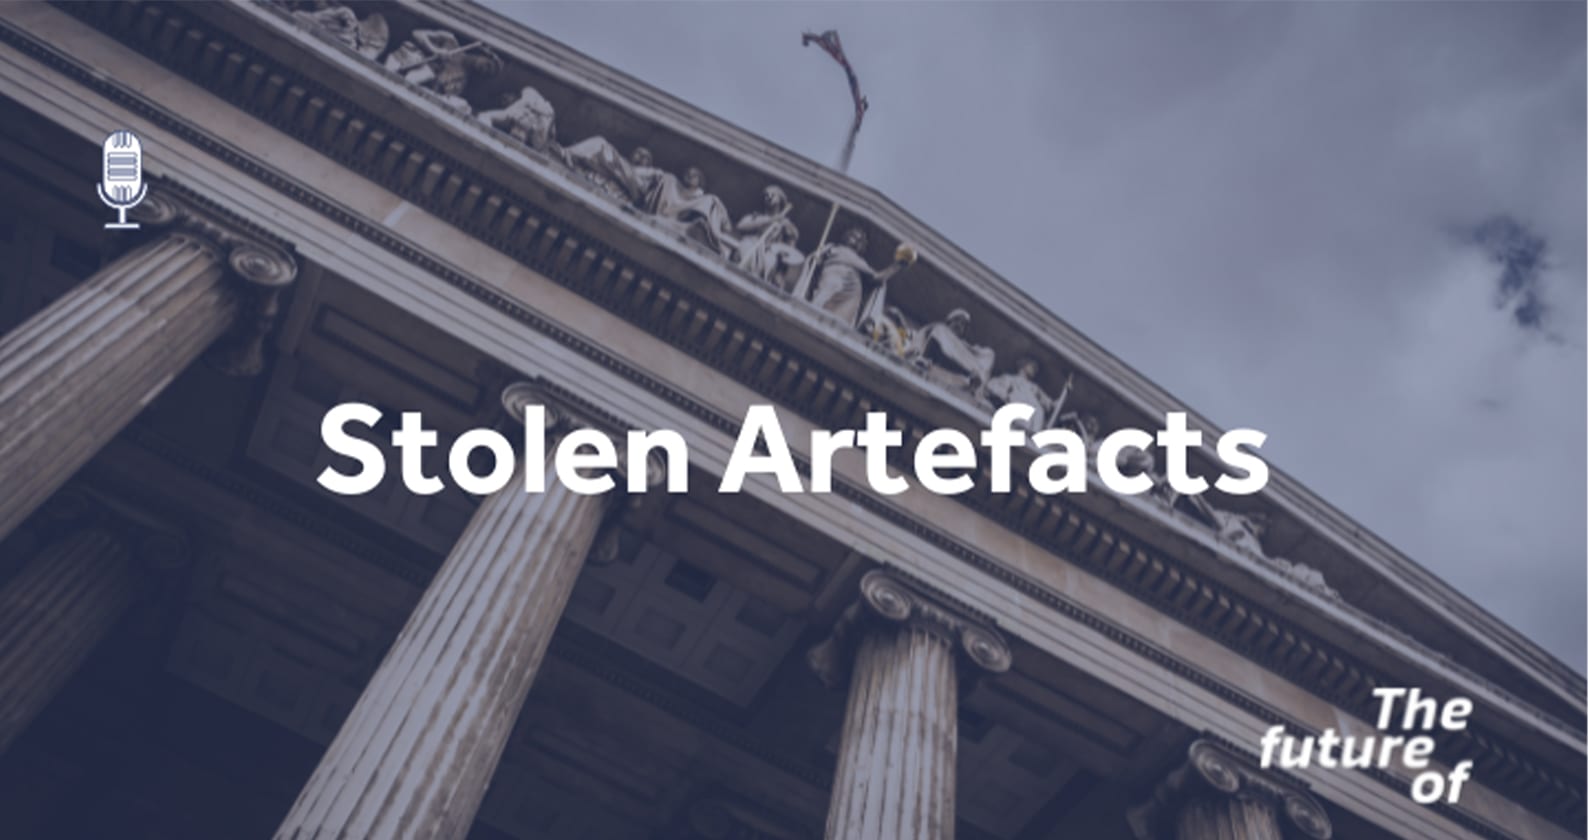 Image for The Future Of podcast: Stolen Artefacts